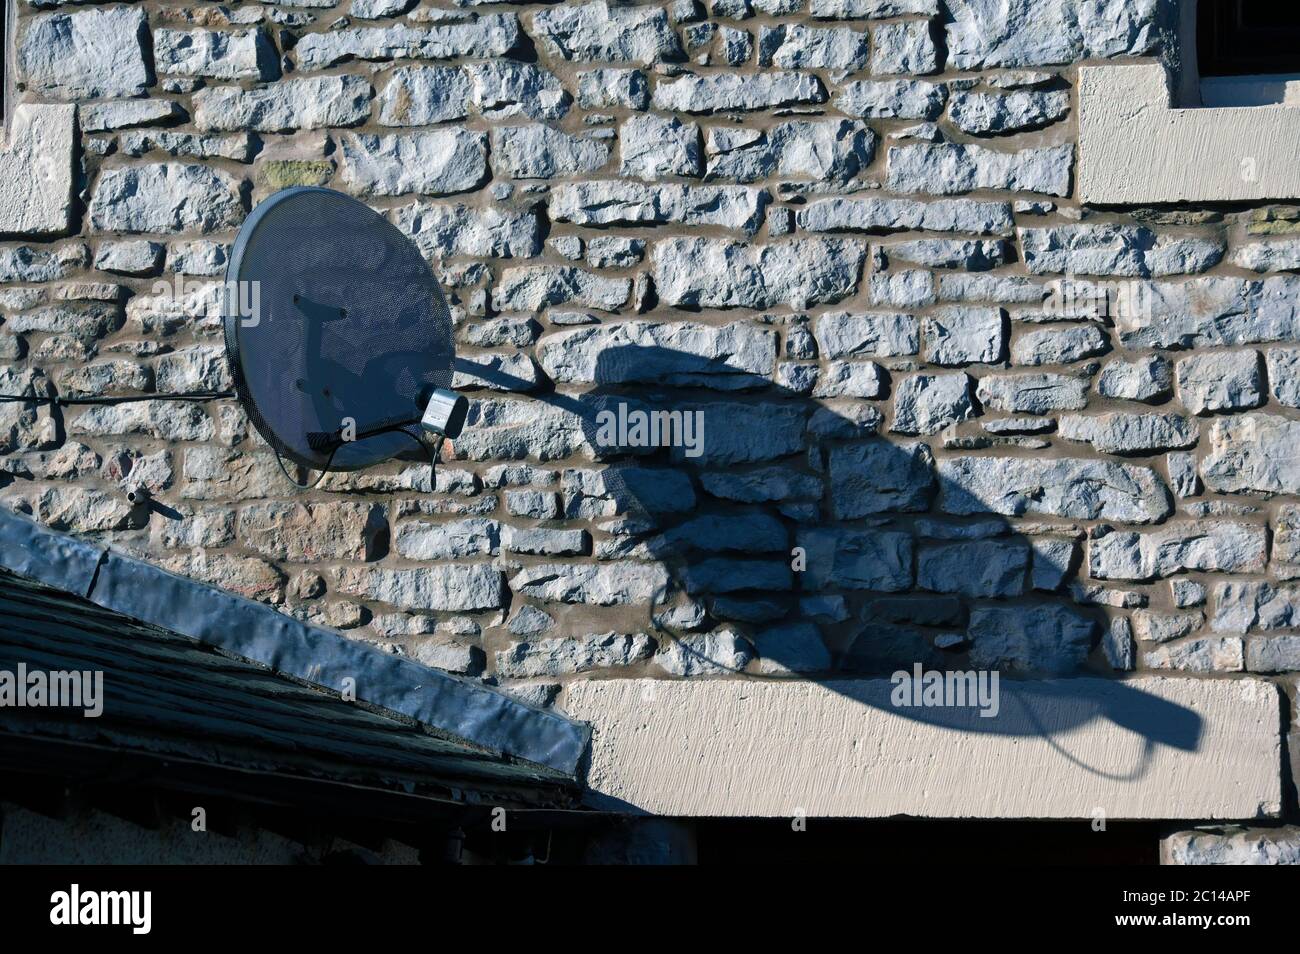 Satellite Dish on stone wall of house. Queen's Road, Fellside, Kendal, Cumbria, England, United Kingdom, Europe. Stock Photo